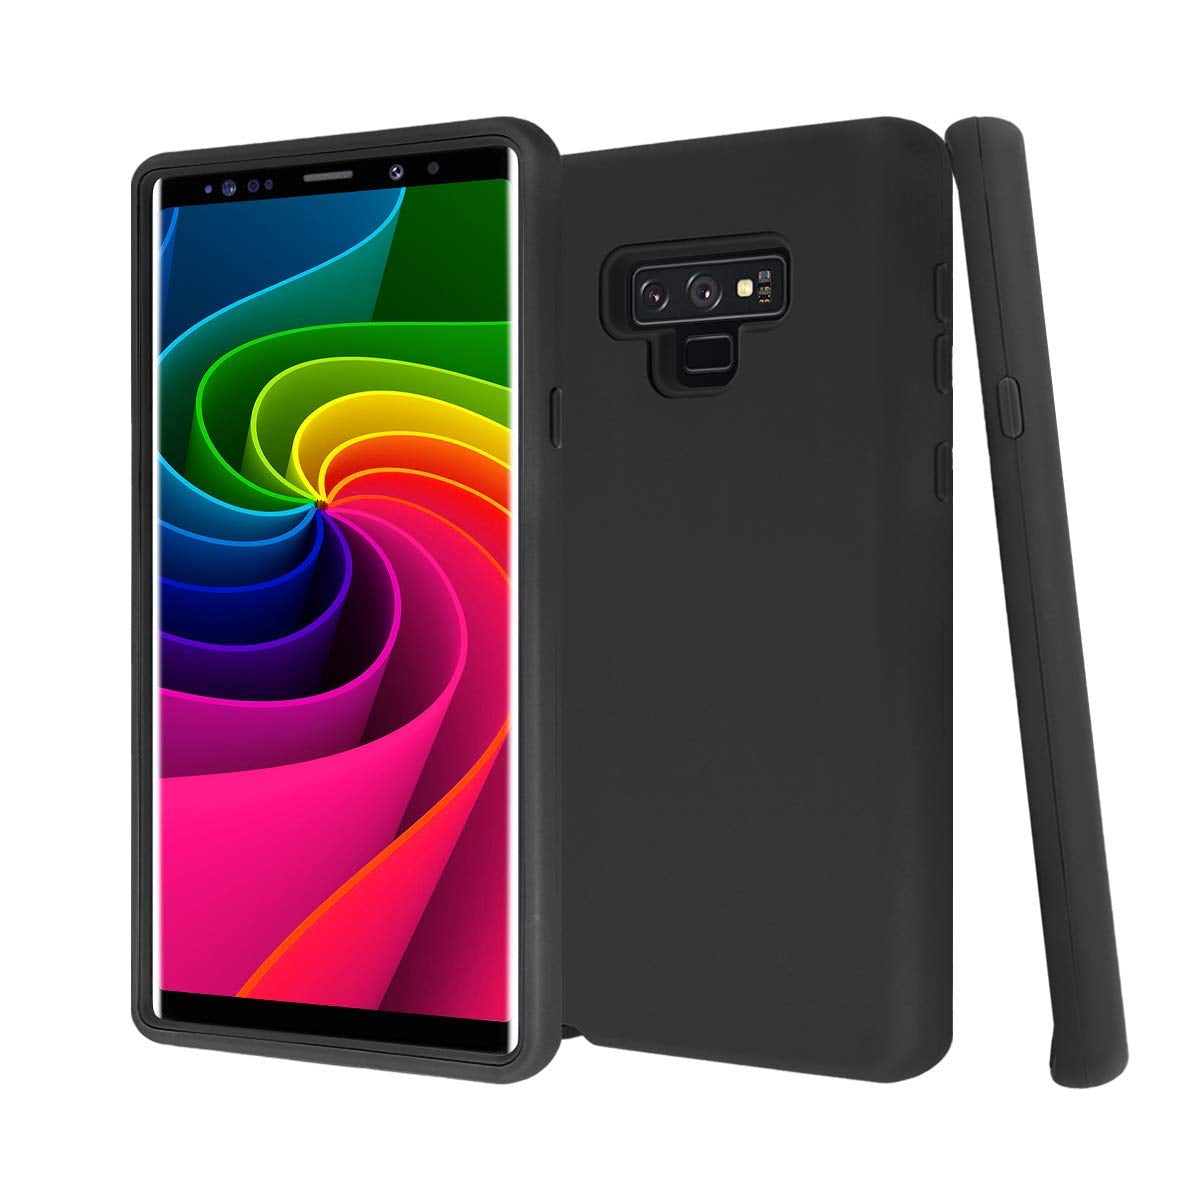 Galaxy Note 9 Case Arkour Minimalist Ultra Thin Slim Fit Cover with Smooth Matte Surface Hard Cases for Samsung Galaxy Note9 - Smooth Black 2018